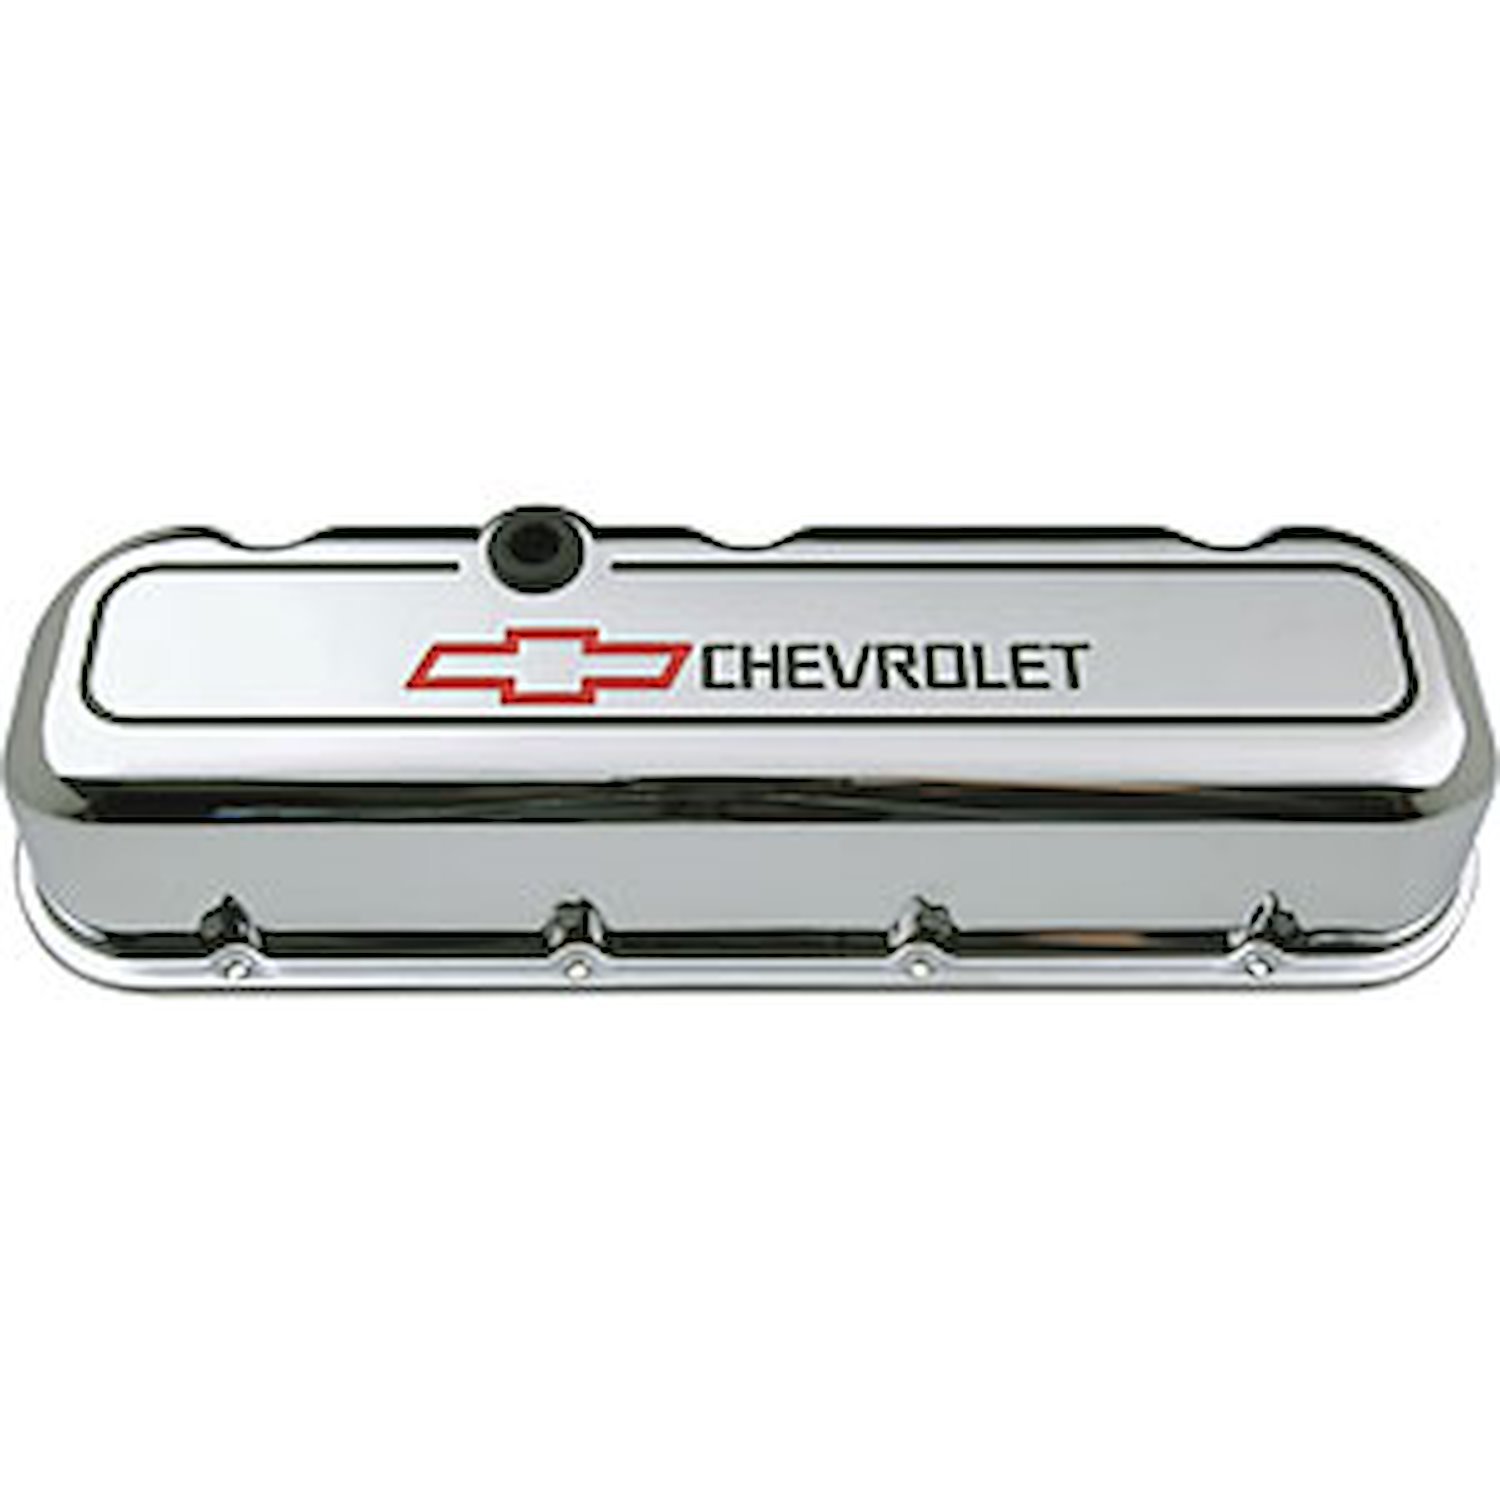 Die-Cast Aluminum Tall Valve Covers for 1965-1996 Big Block Chevy with Chevrolet/Bowtie Recessed Emblem in Chrome Finish